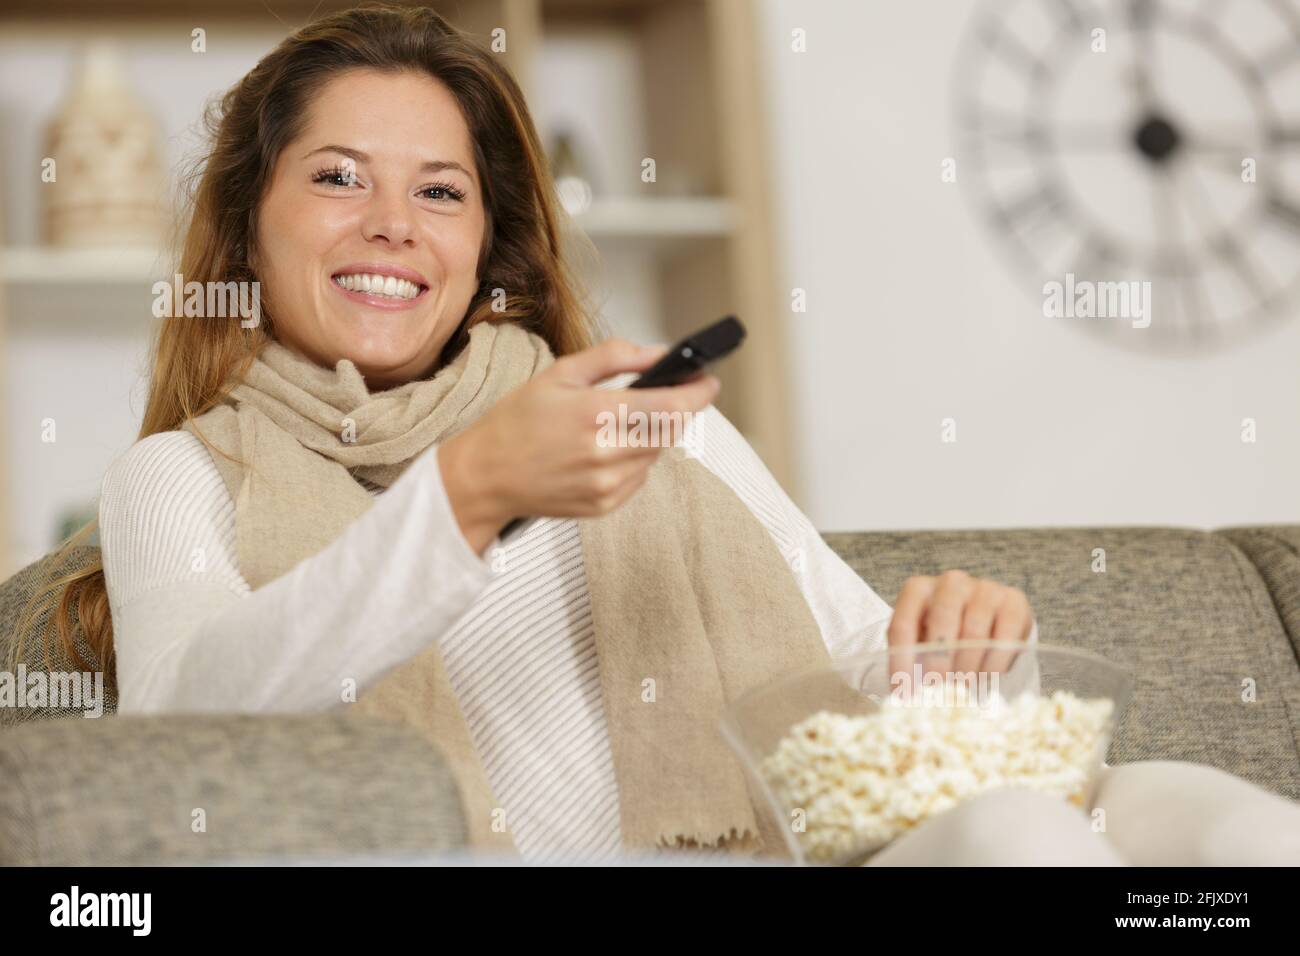 portrait of a funny young watching tv Stock Photo